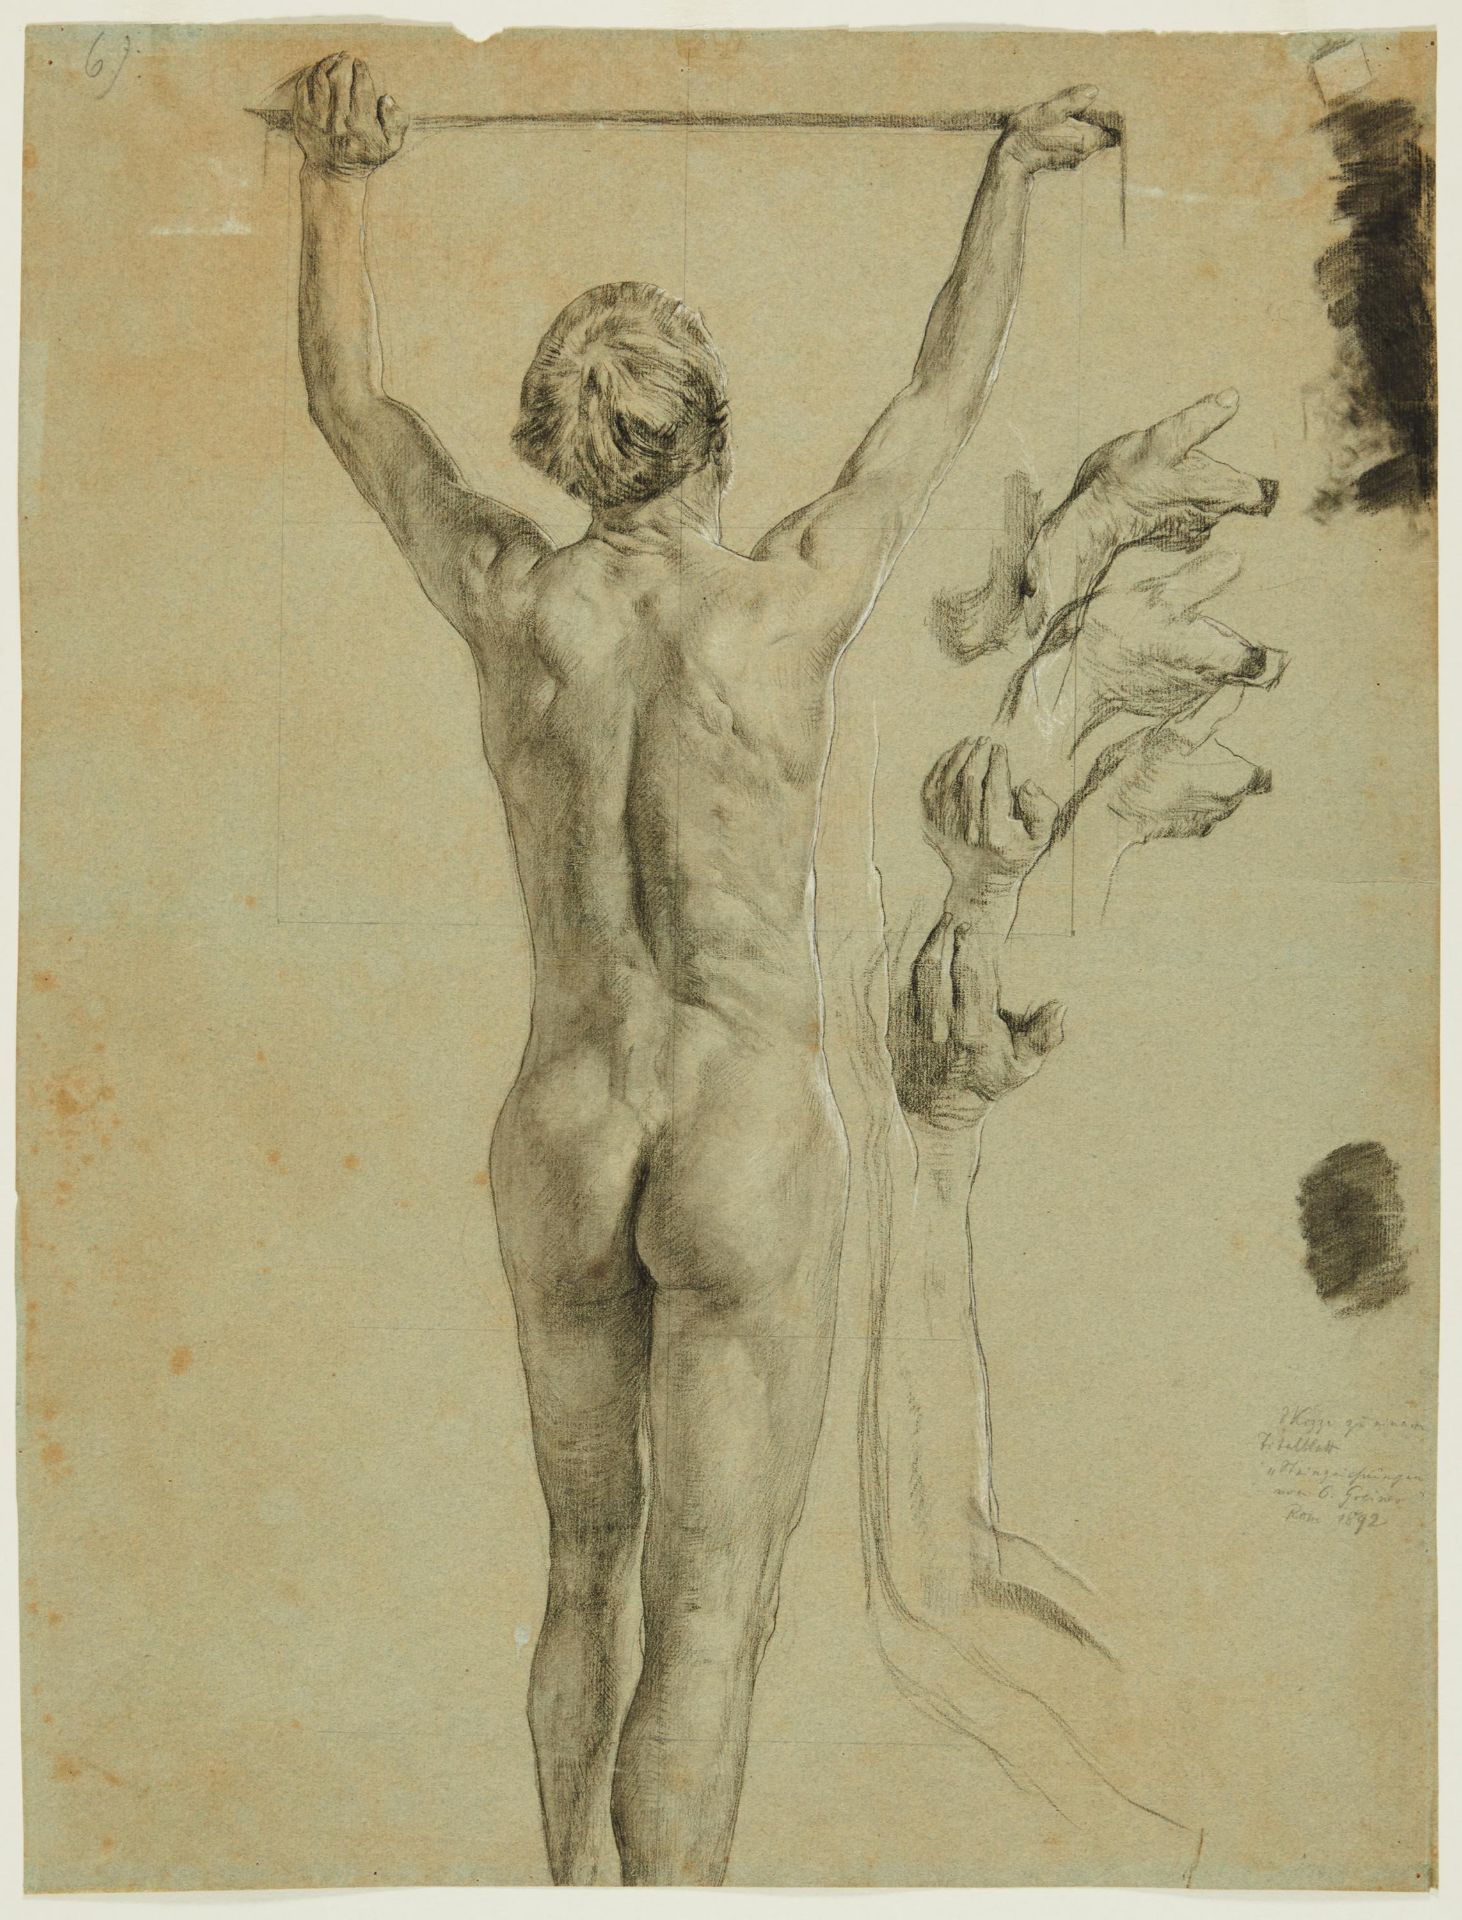 Otto Greiner: Nude Study of a Young Boy from Behind as well as Studies of a Hand - Image 2 of 3